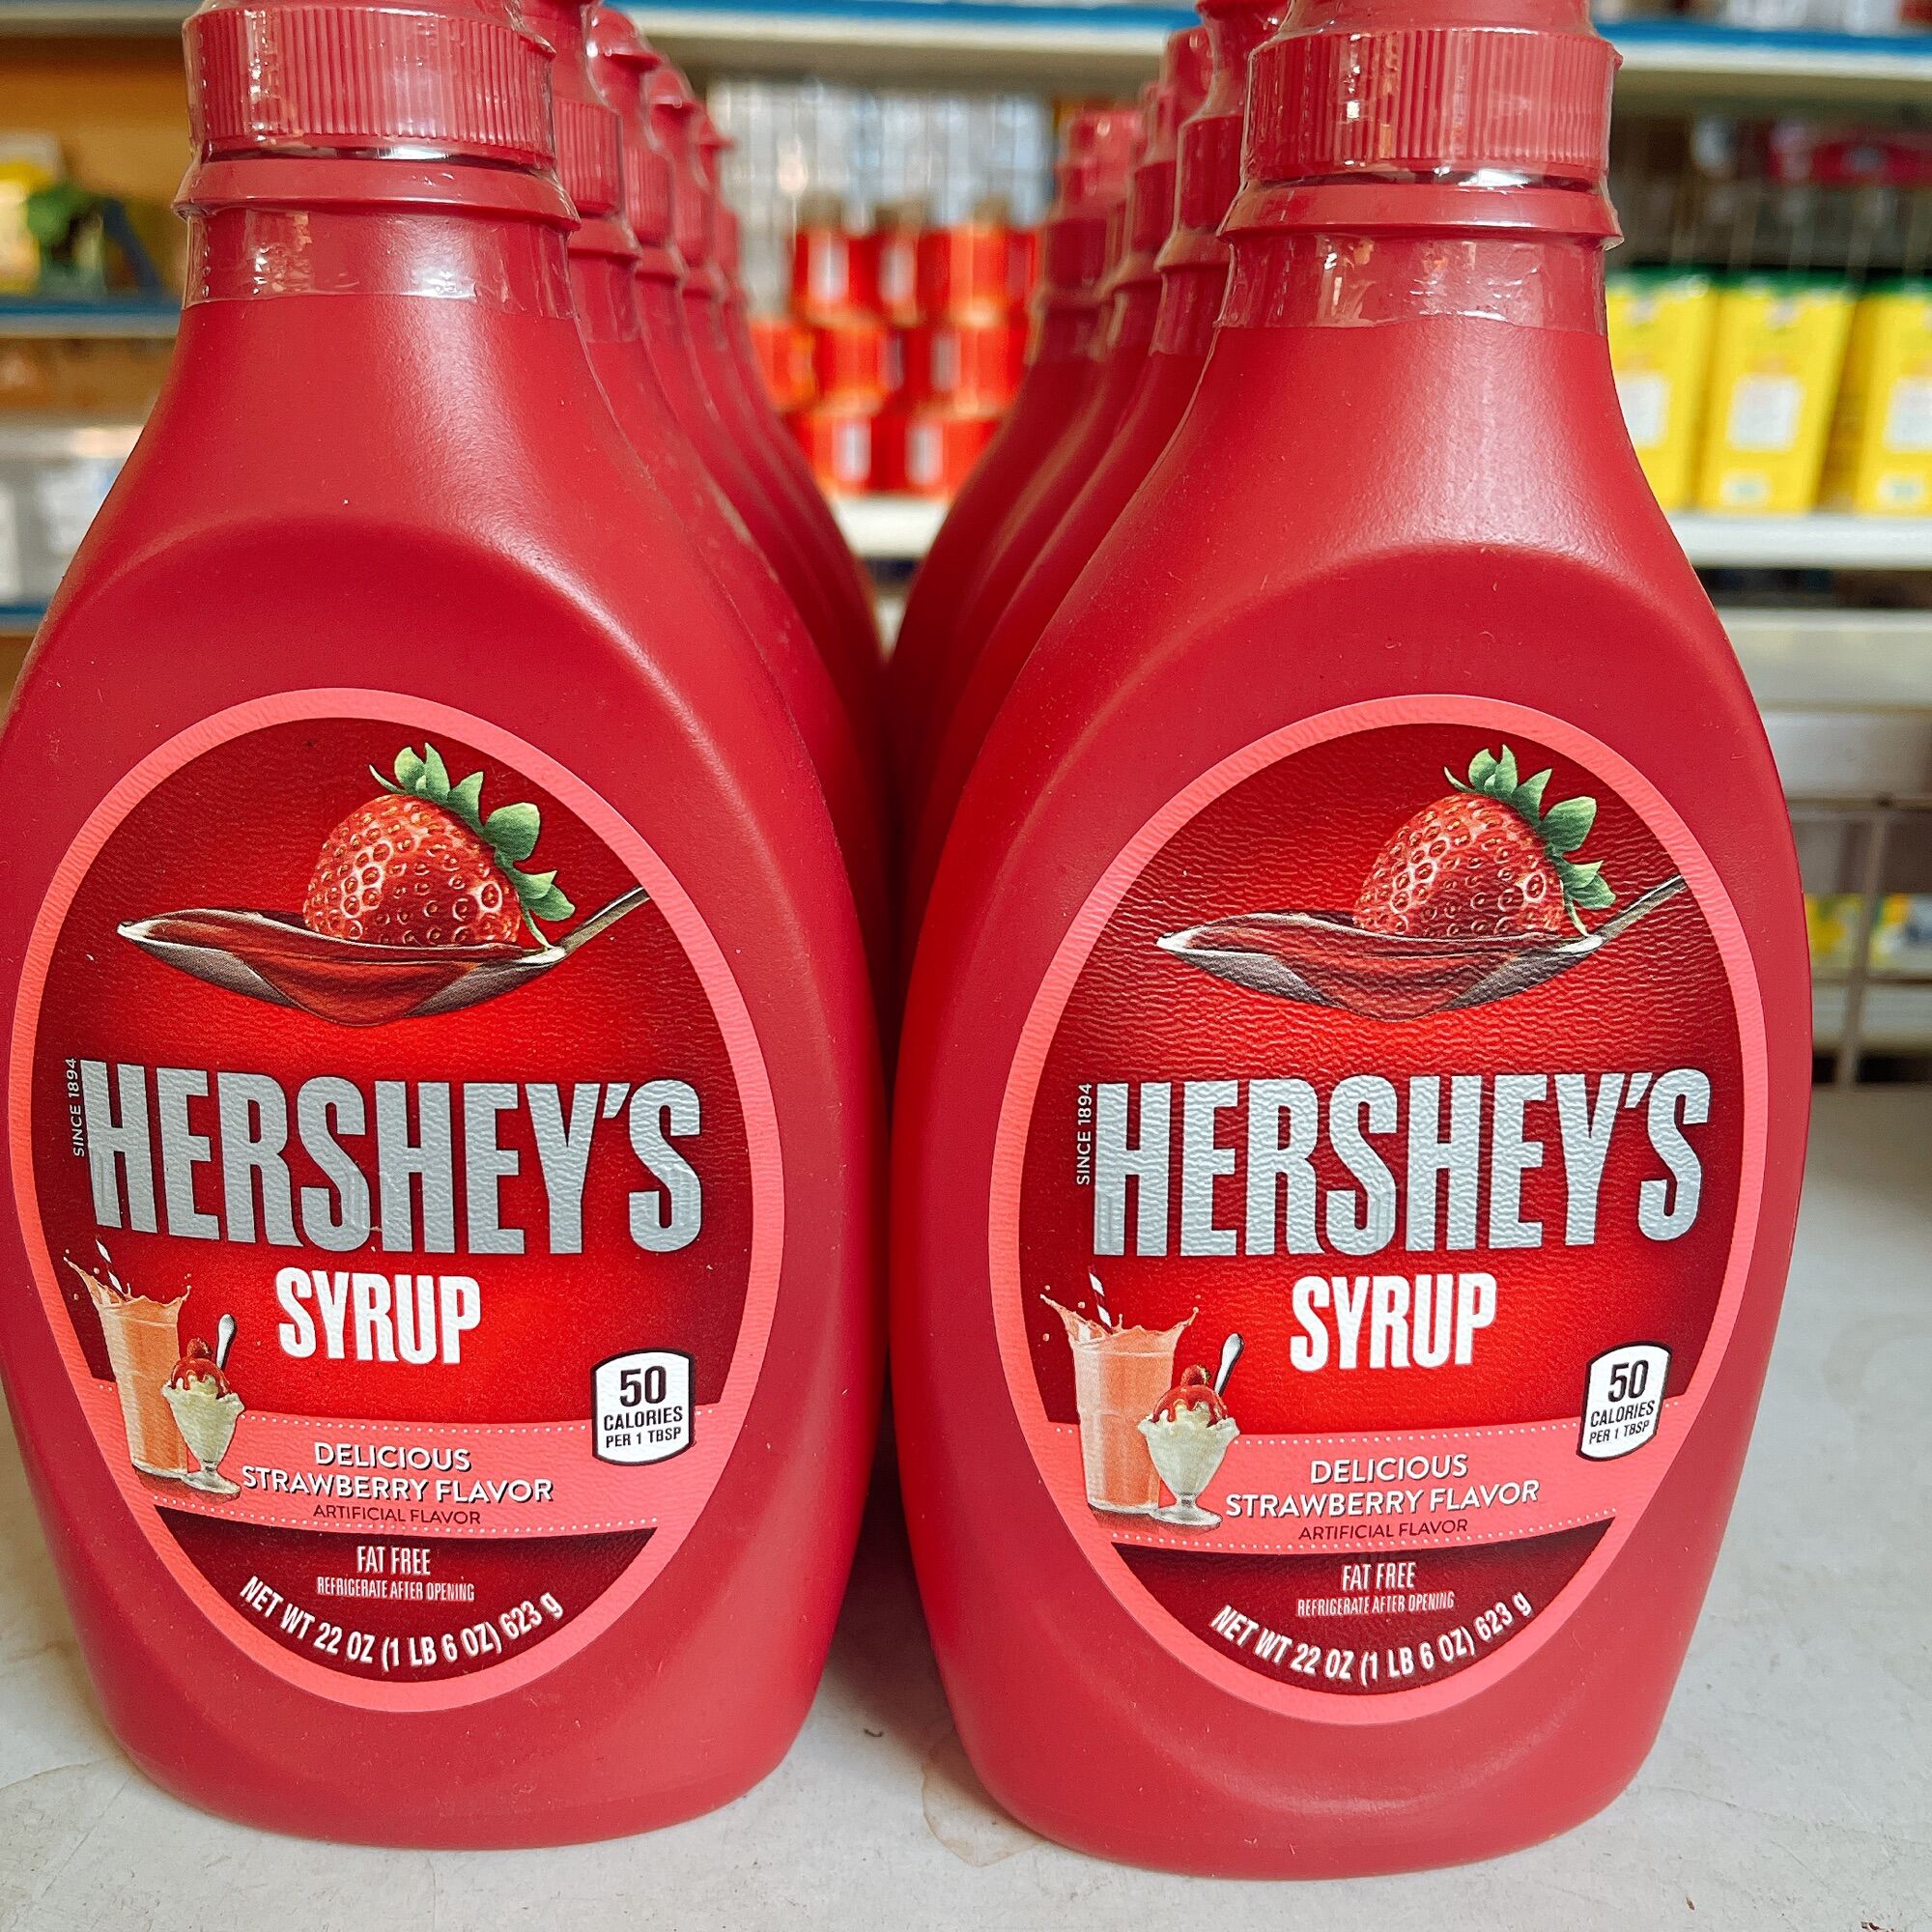 Siro vị dâu Hershey s Syrup - Delicious Strawberry Flavor